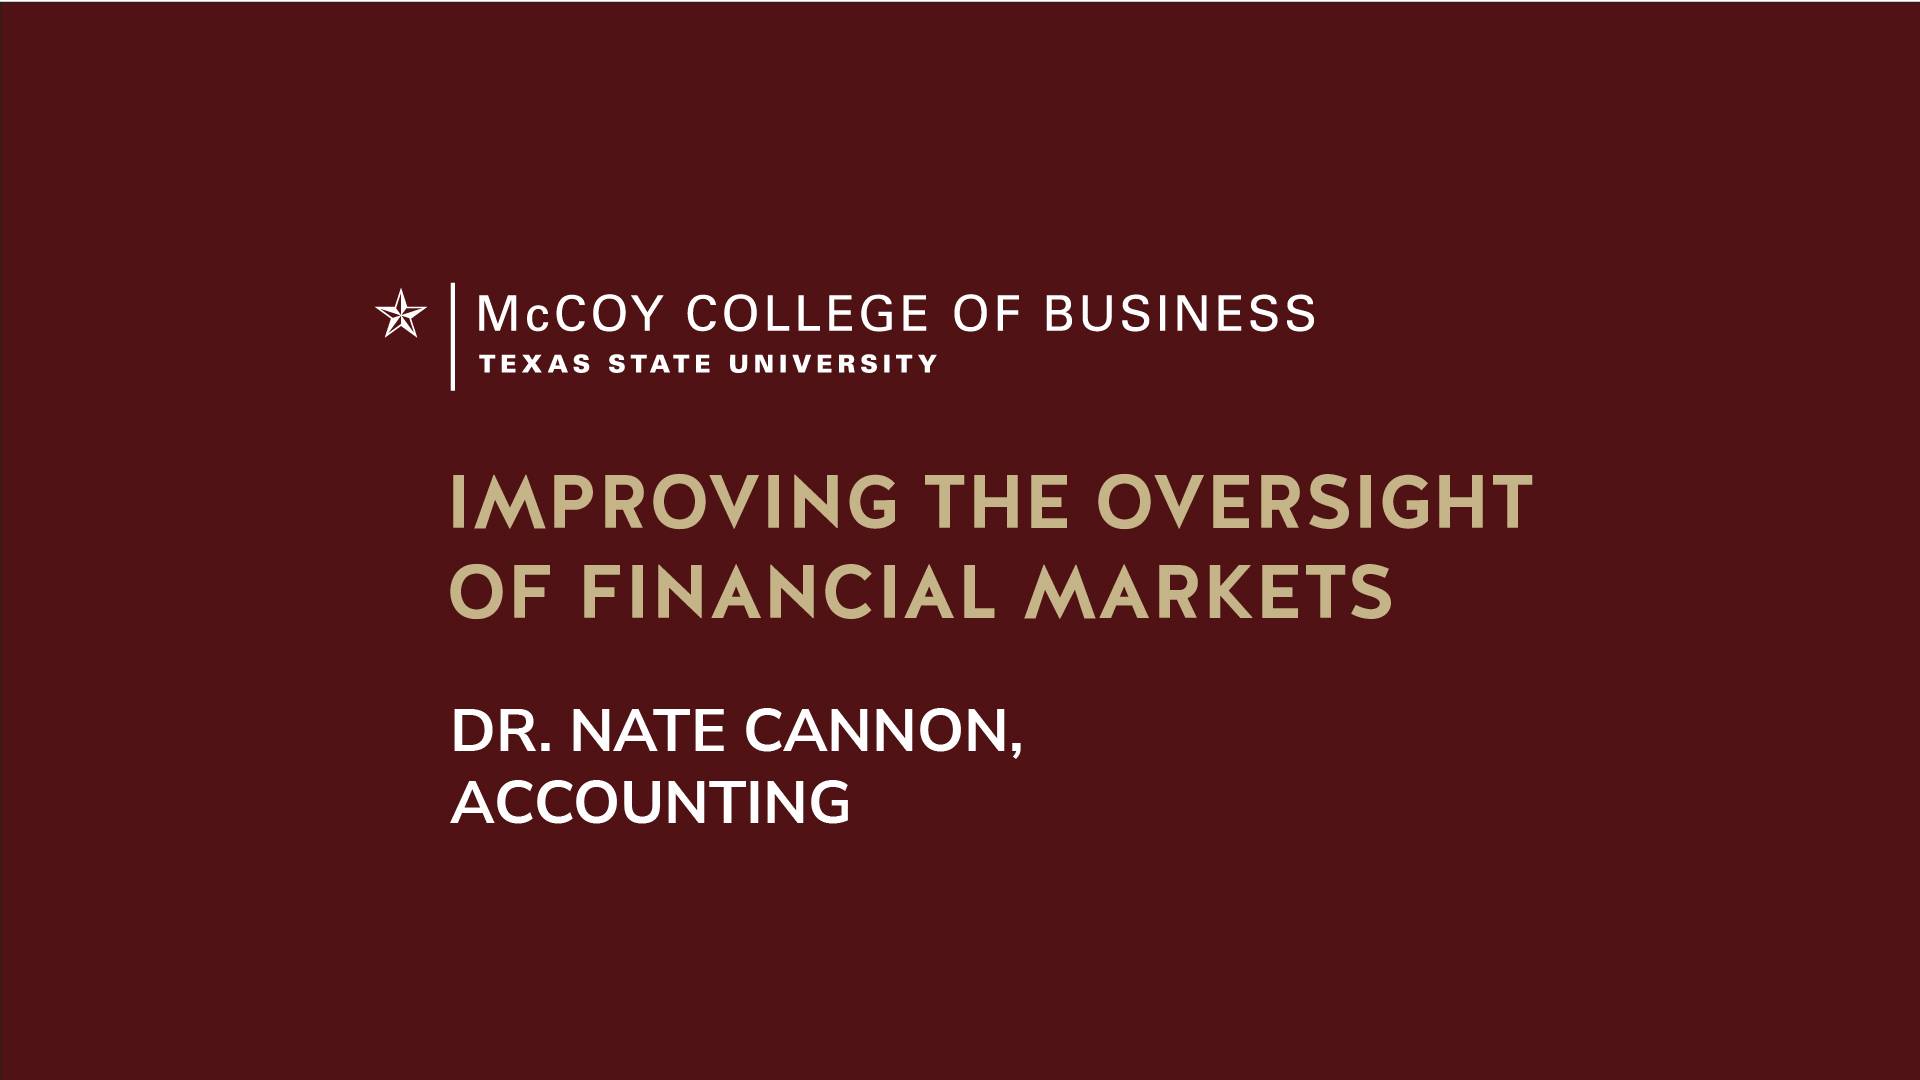 Dr. Nate Cannon discusses how he is improving the oversight of financial markets